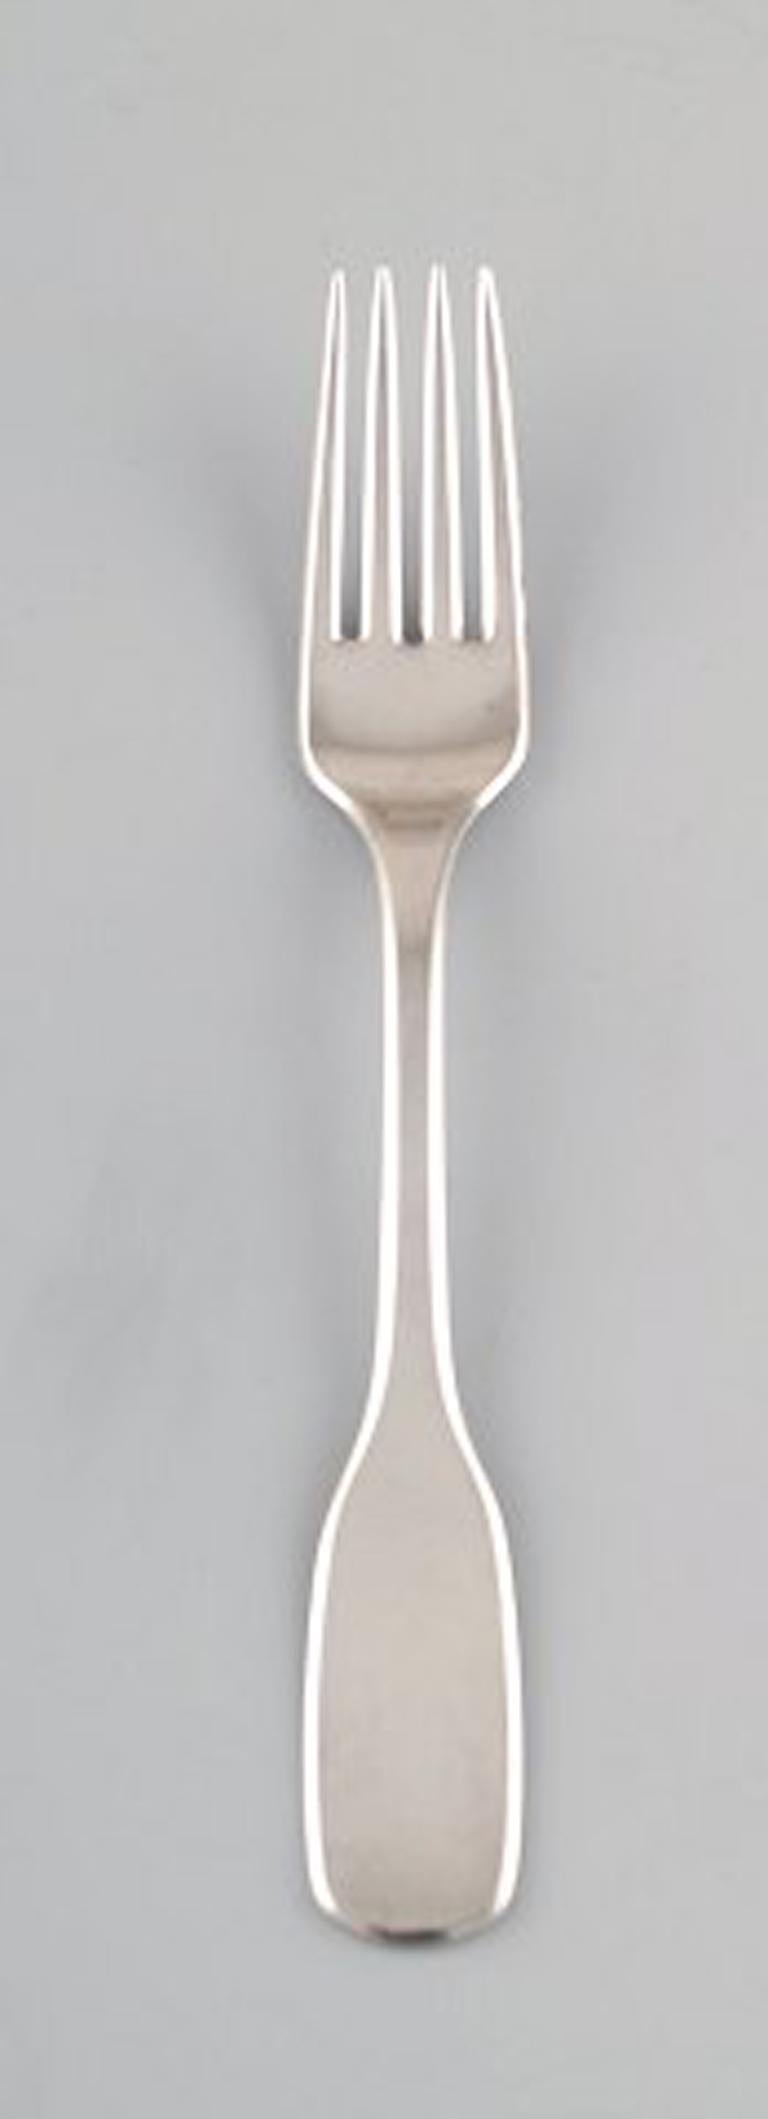 Hans Hansen silverware Susanne, dinner fork in sterling silver.
Measures: 18 cm.
Perfect condition.
Stamped.
2 pieces in stock.